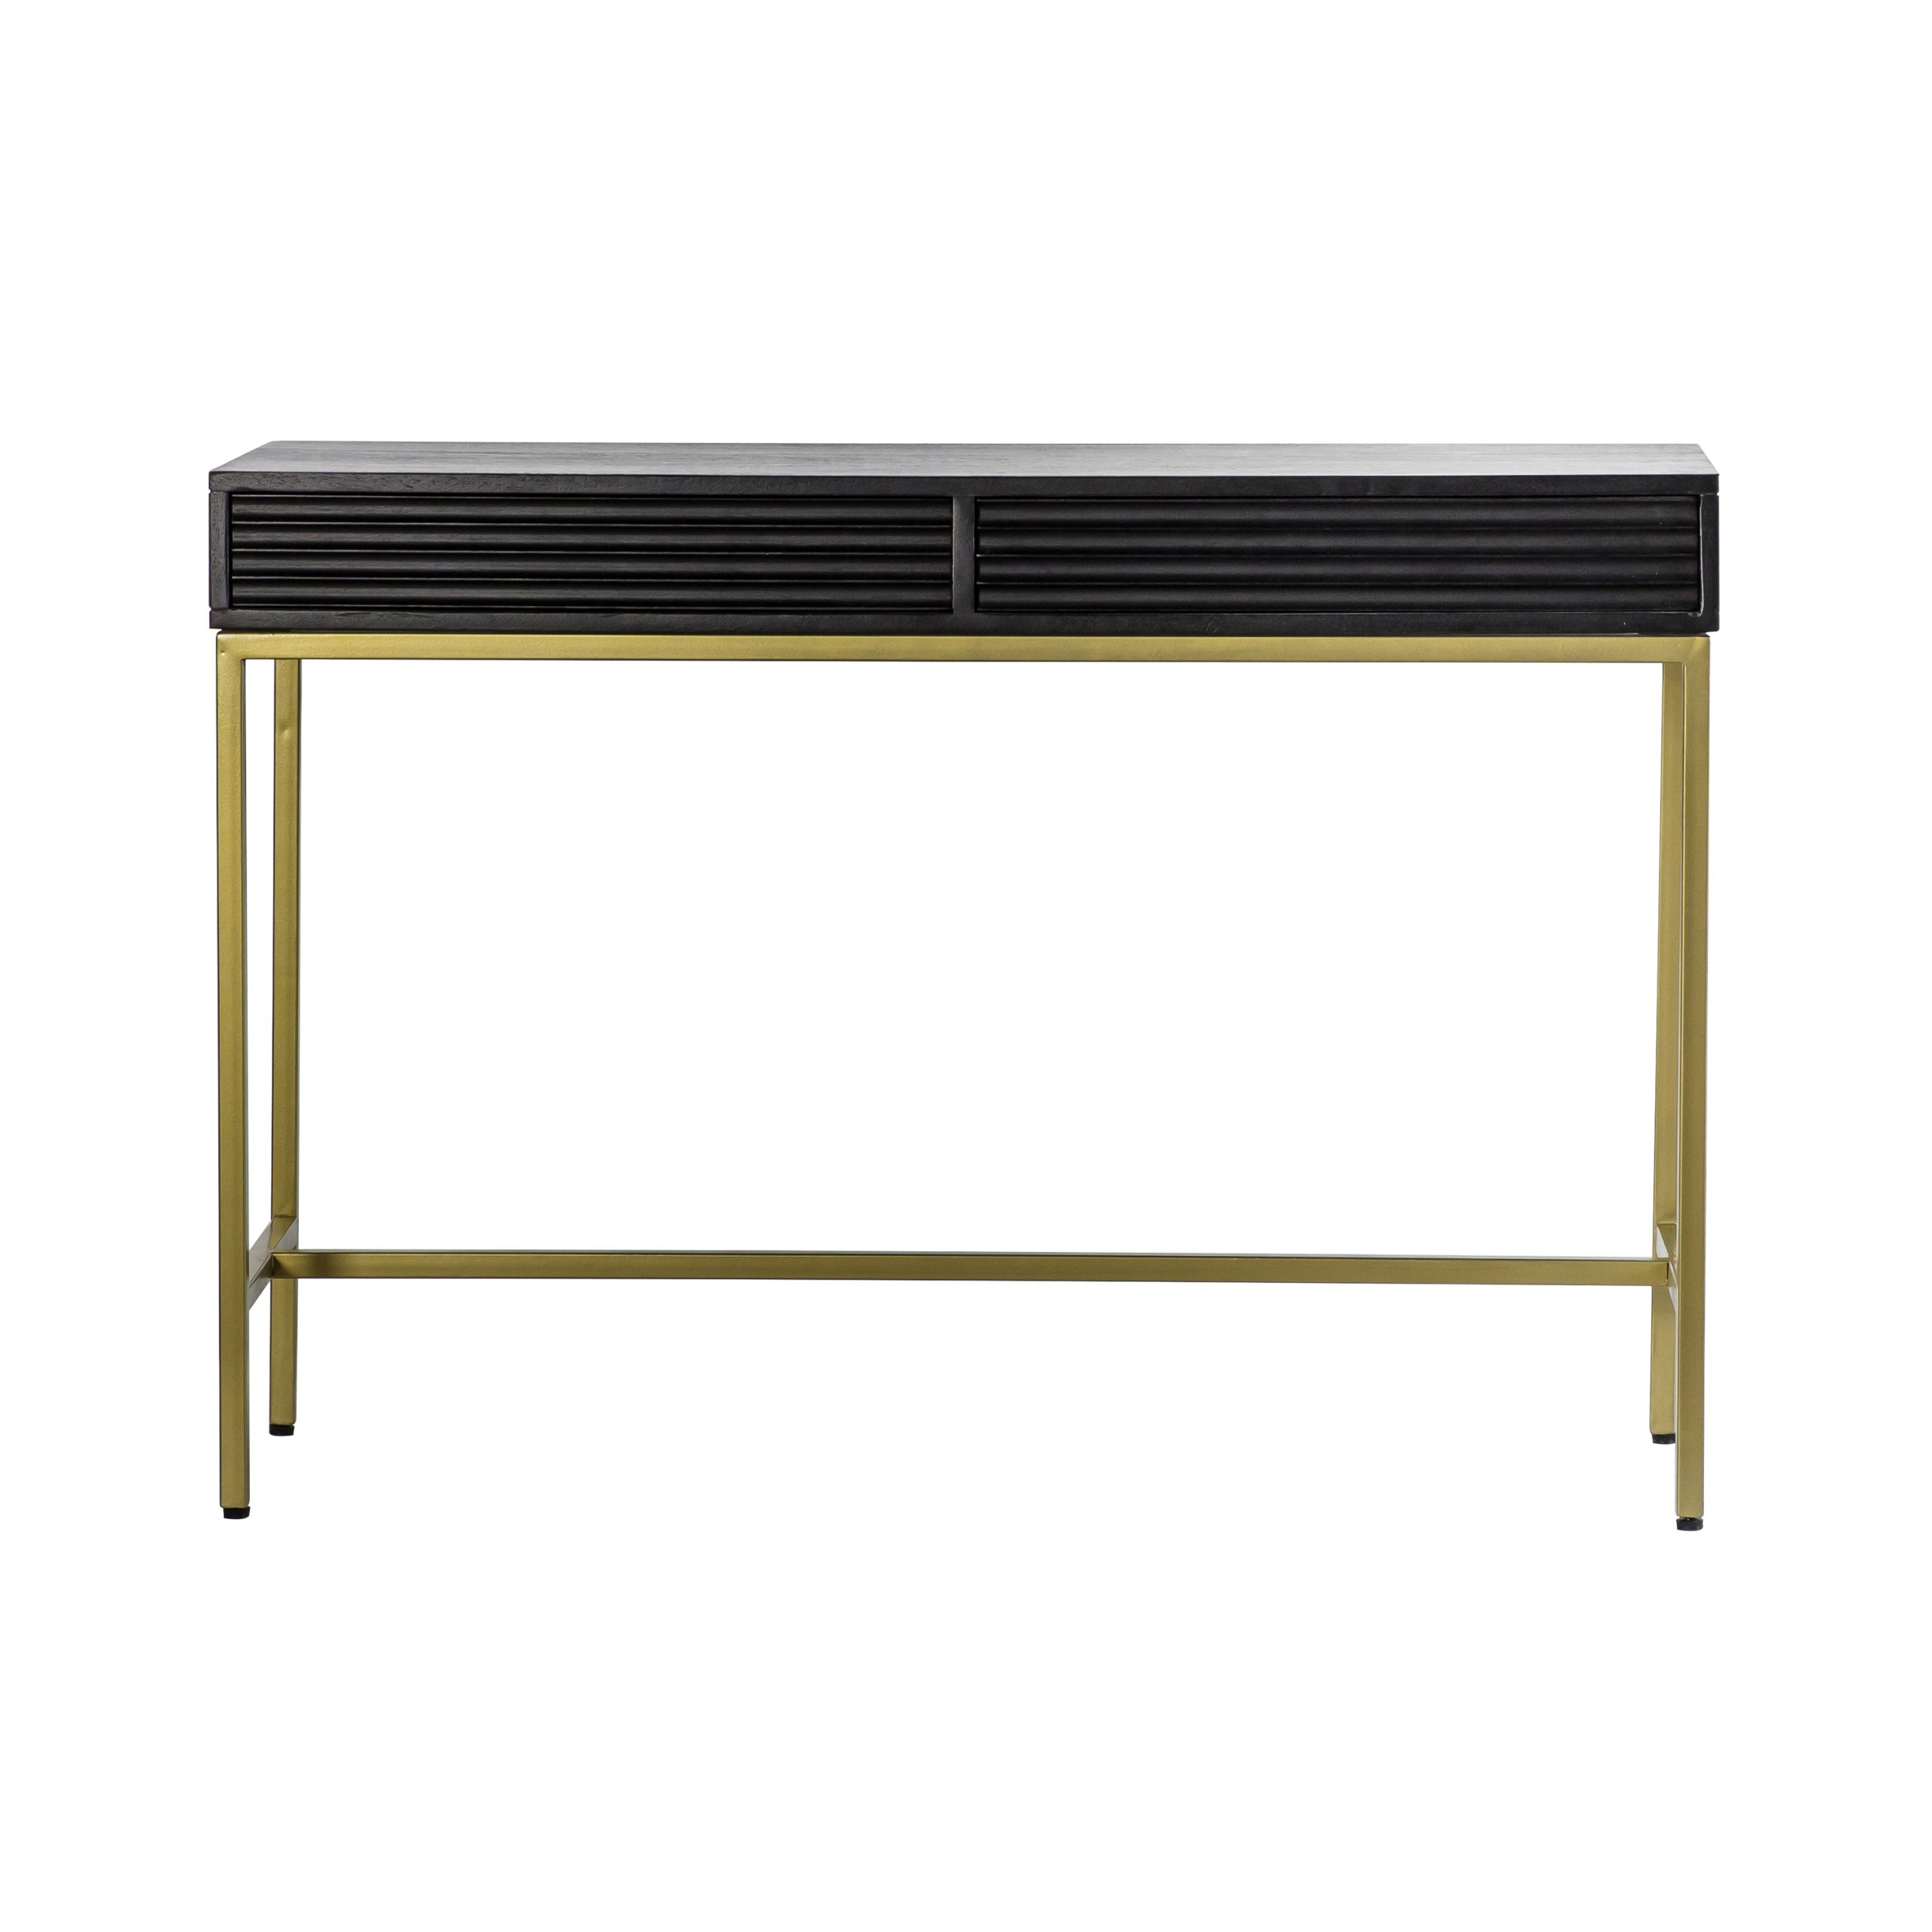 Gallery Direct Ripple 2 Drawer Console Table